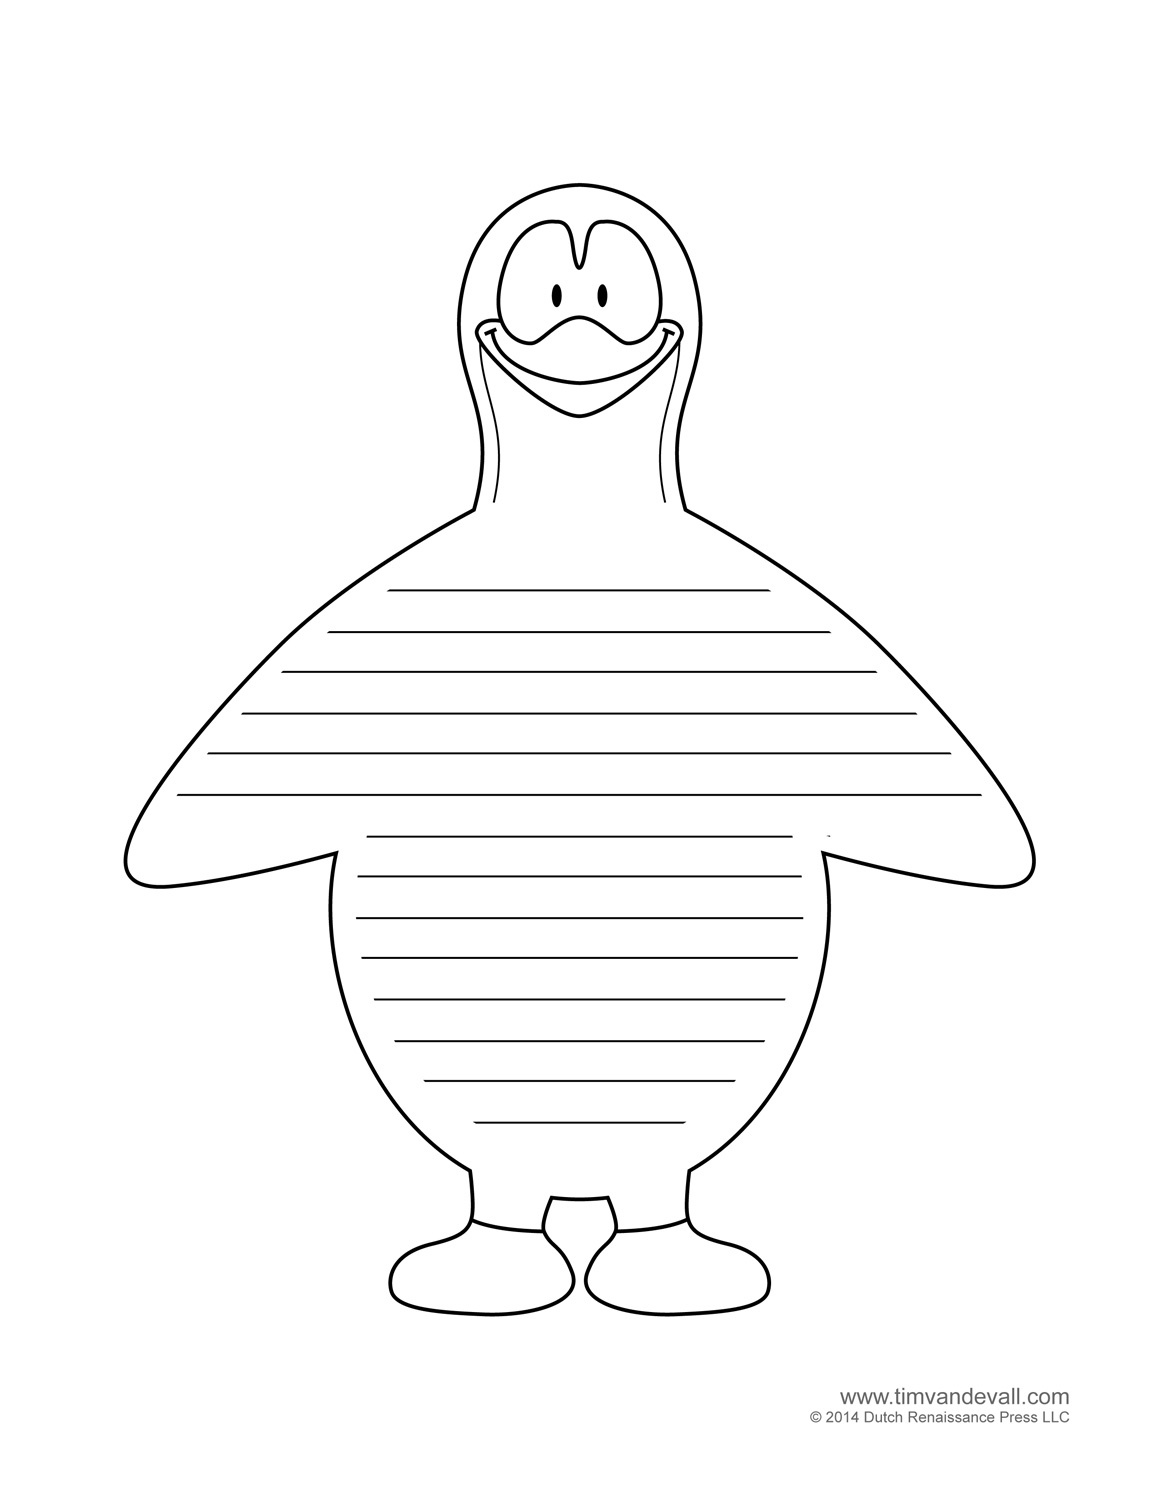 Penguin Template, Coloring Pages, Clipart Pictures And Crafts - Free Printable Penguin Books